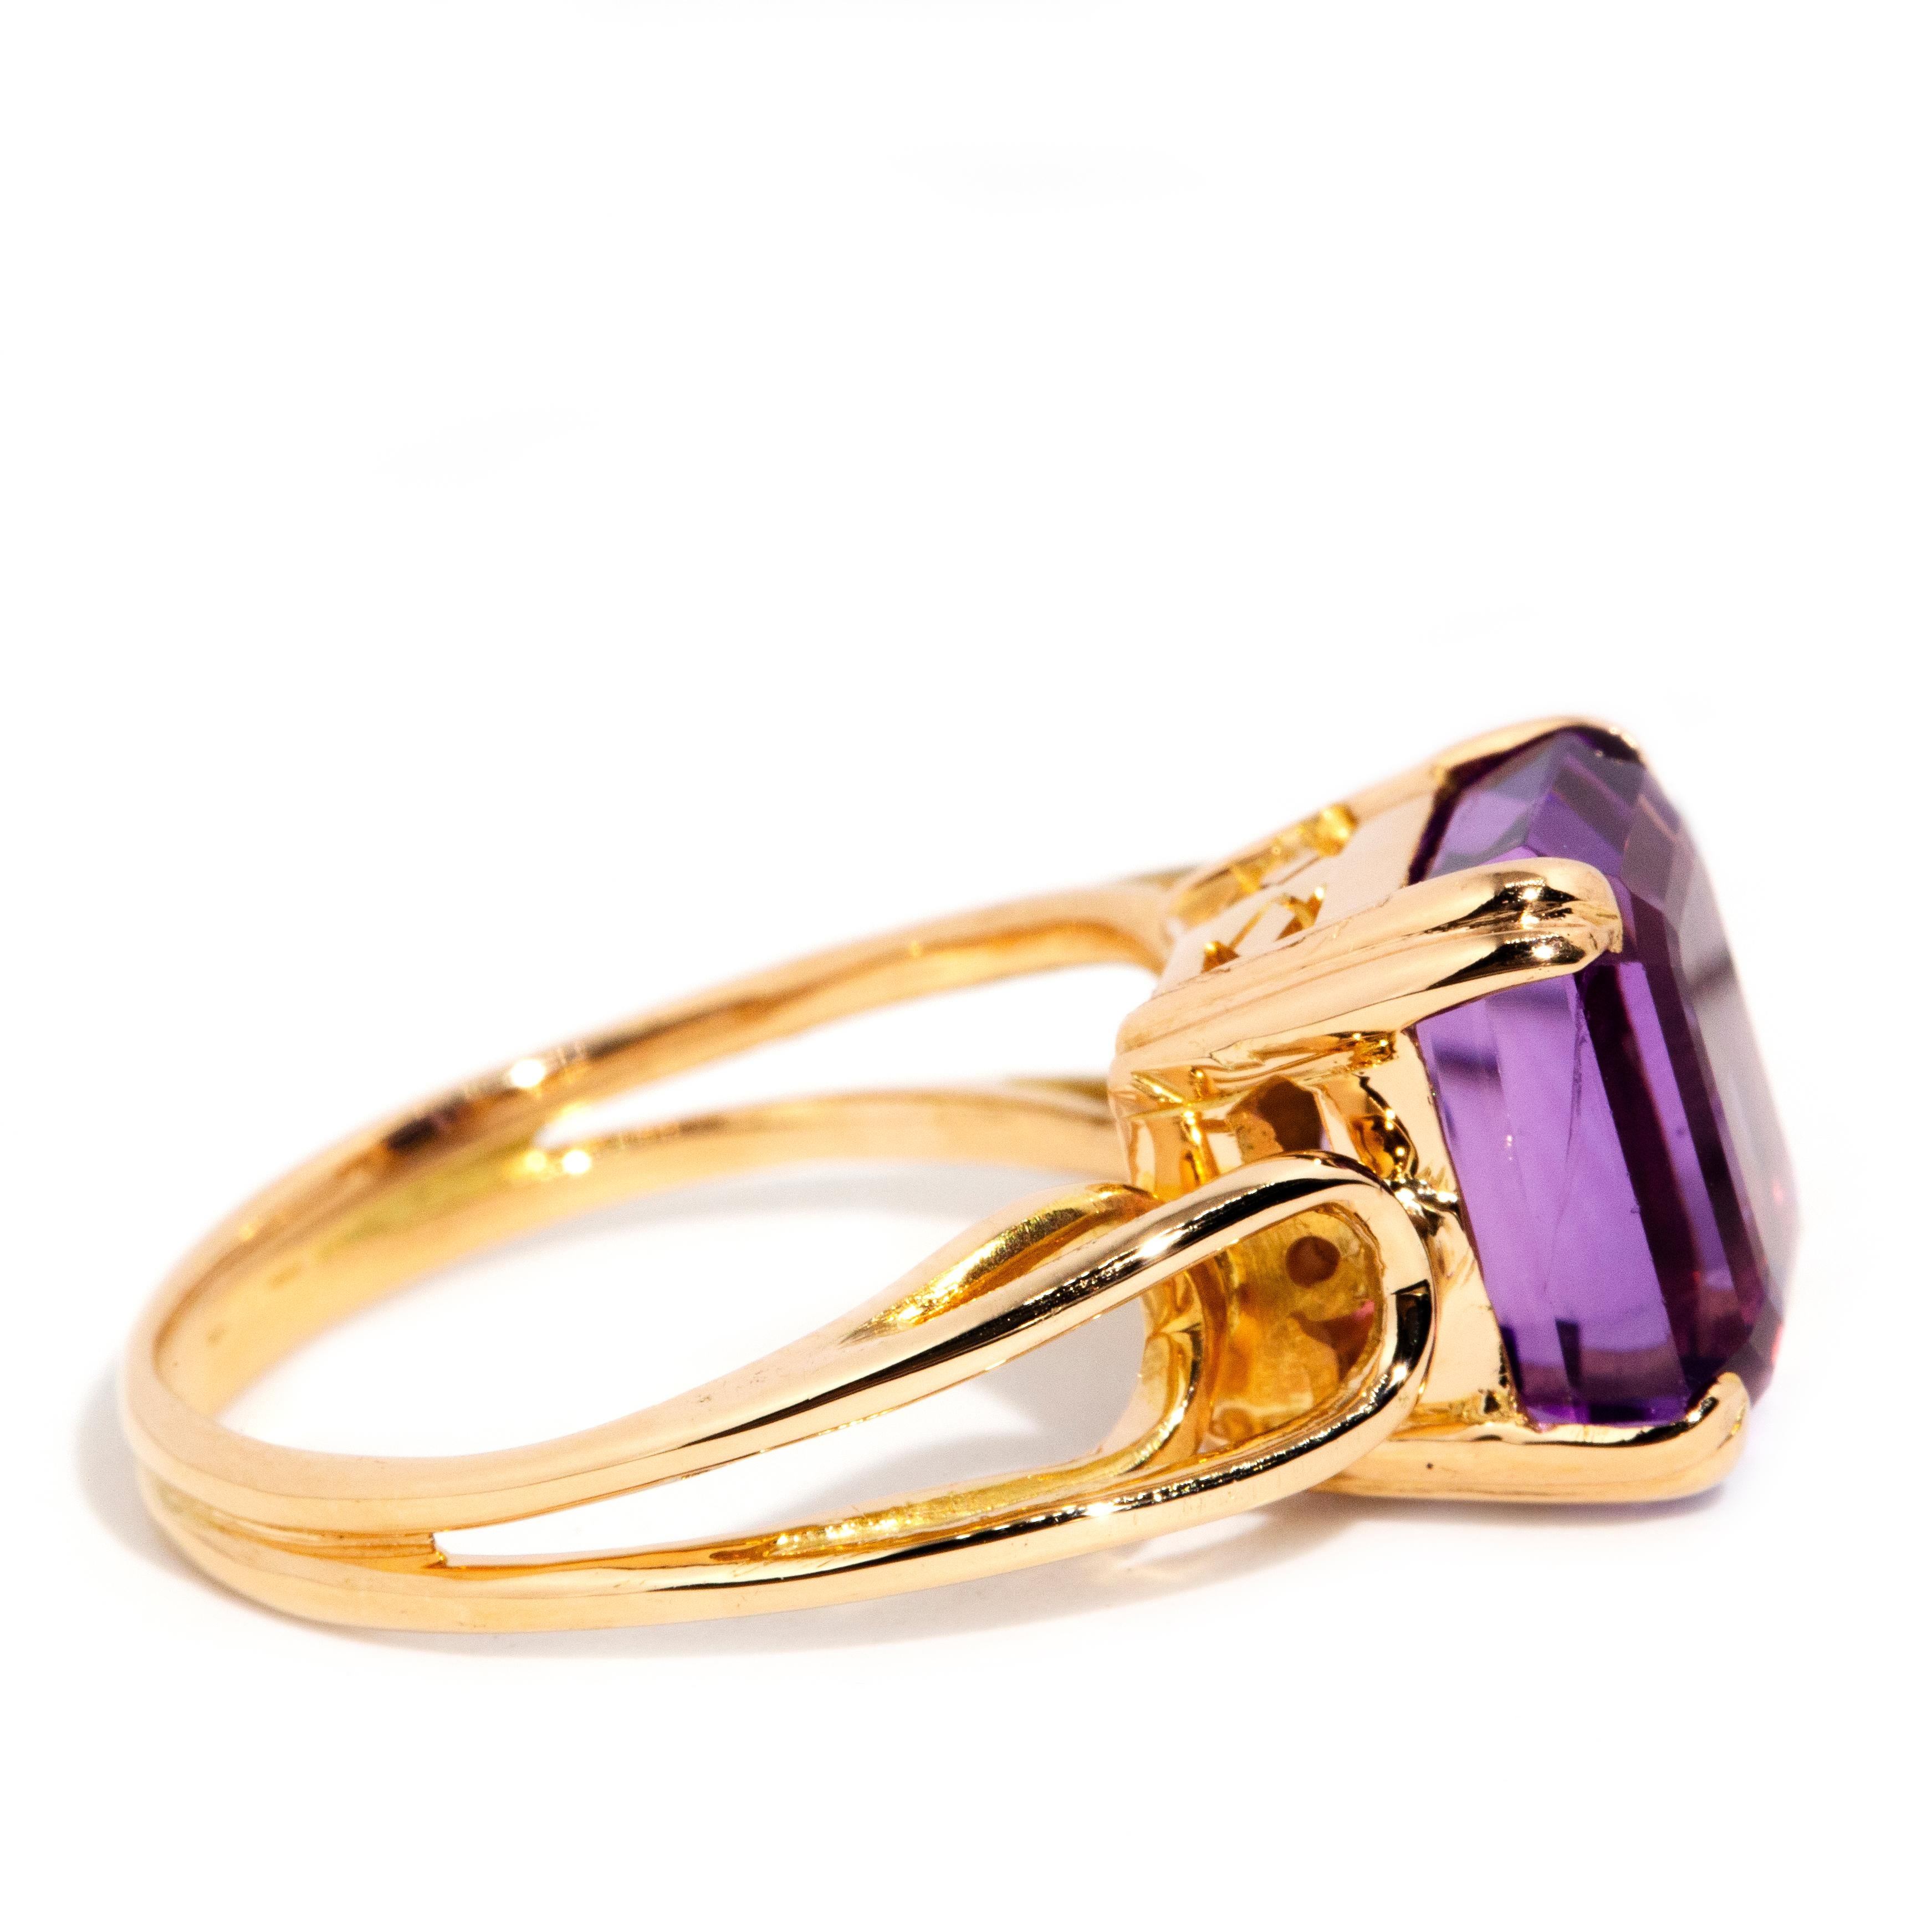 Vintage Circa 1980s 18 Carat Yellow Gold Emerald Cut Bright Purple Amethyst Ring For Sale 2